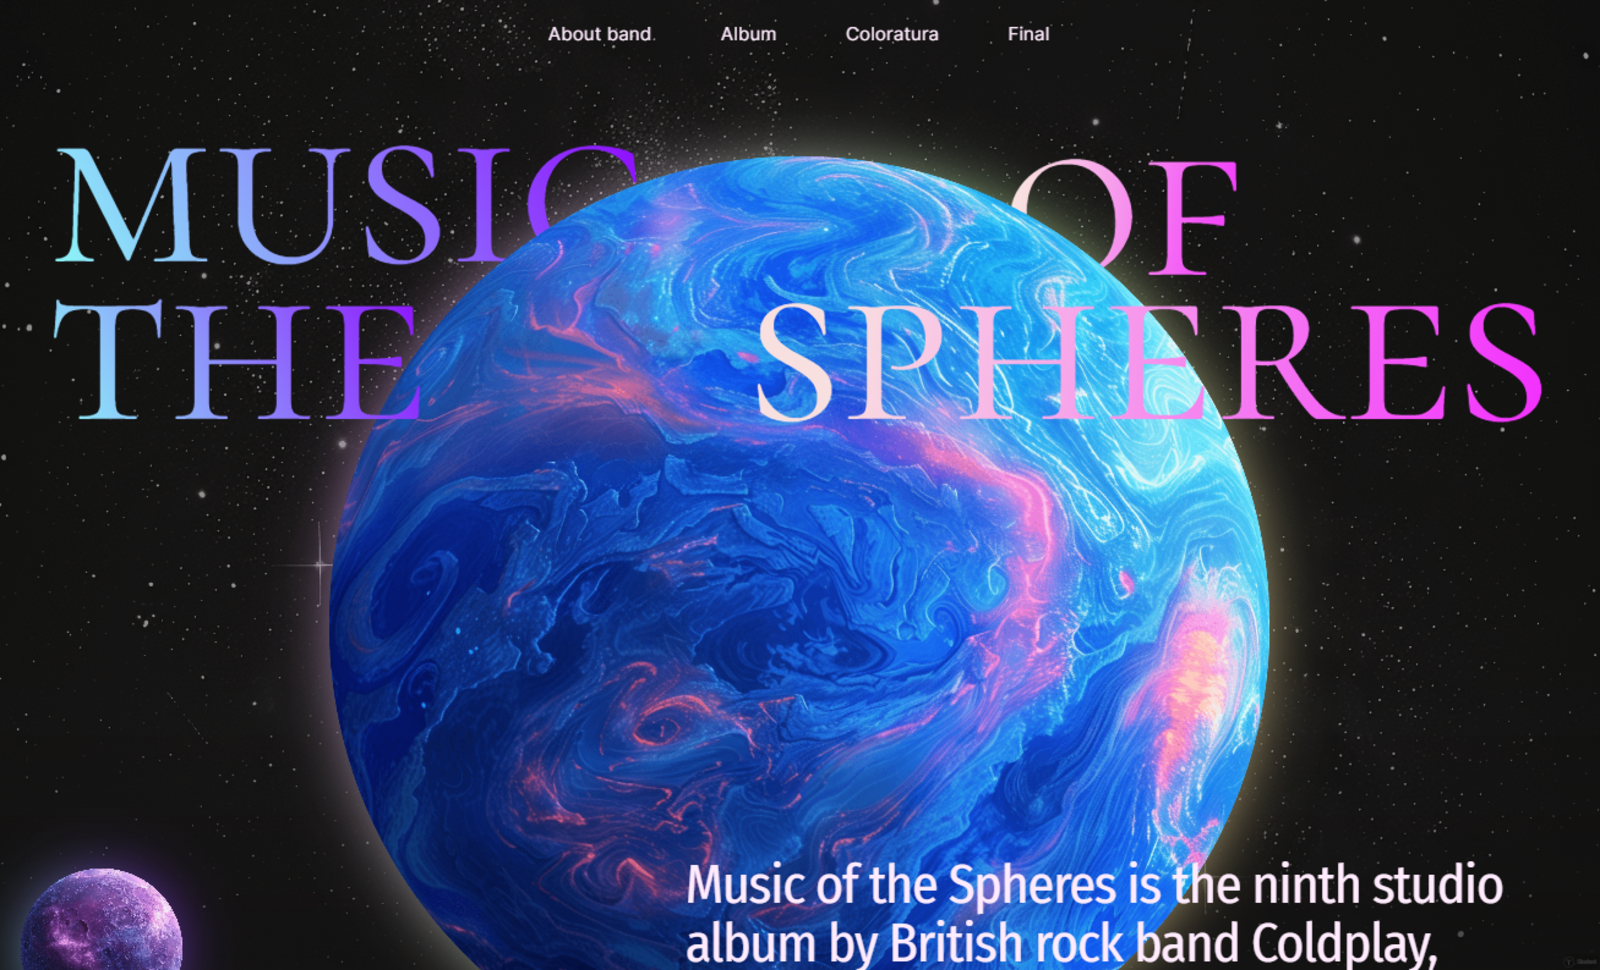 Music of the spheres